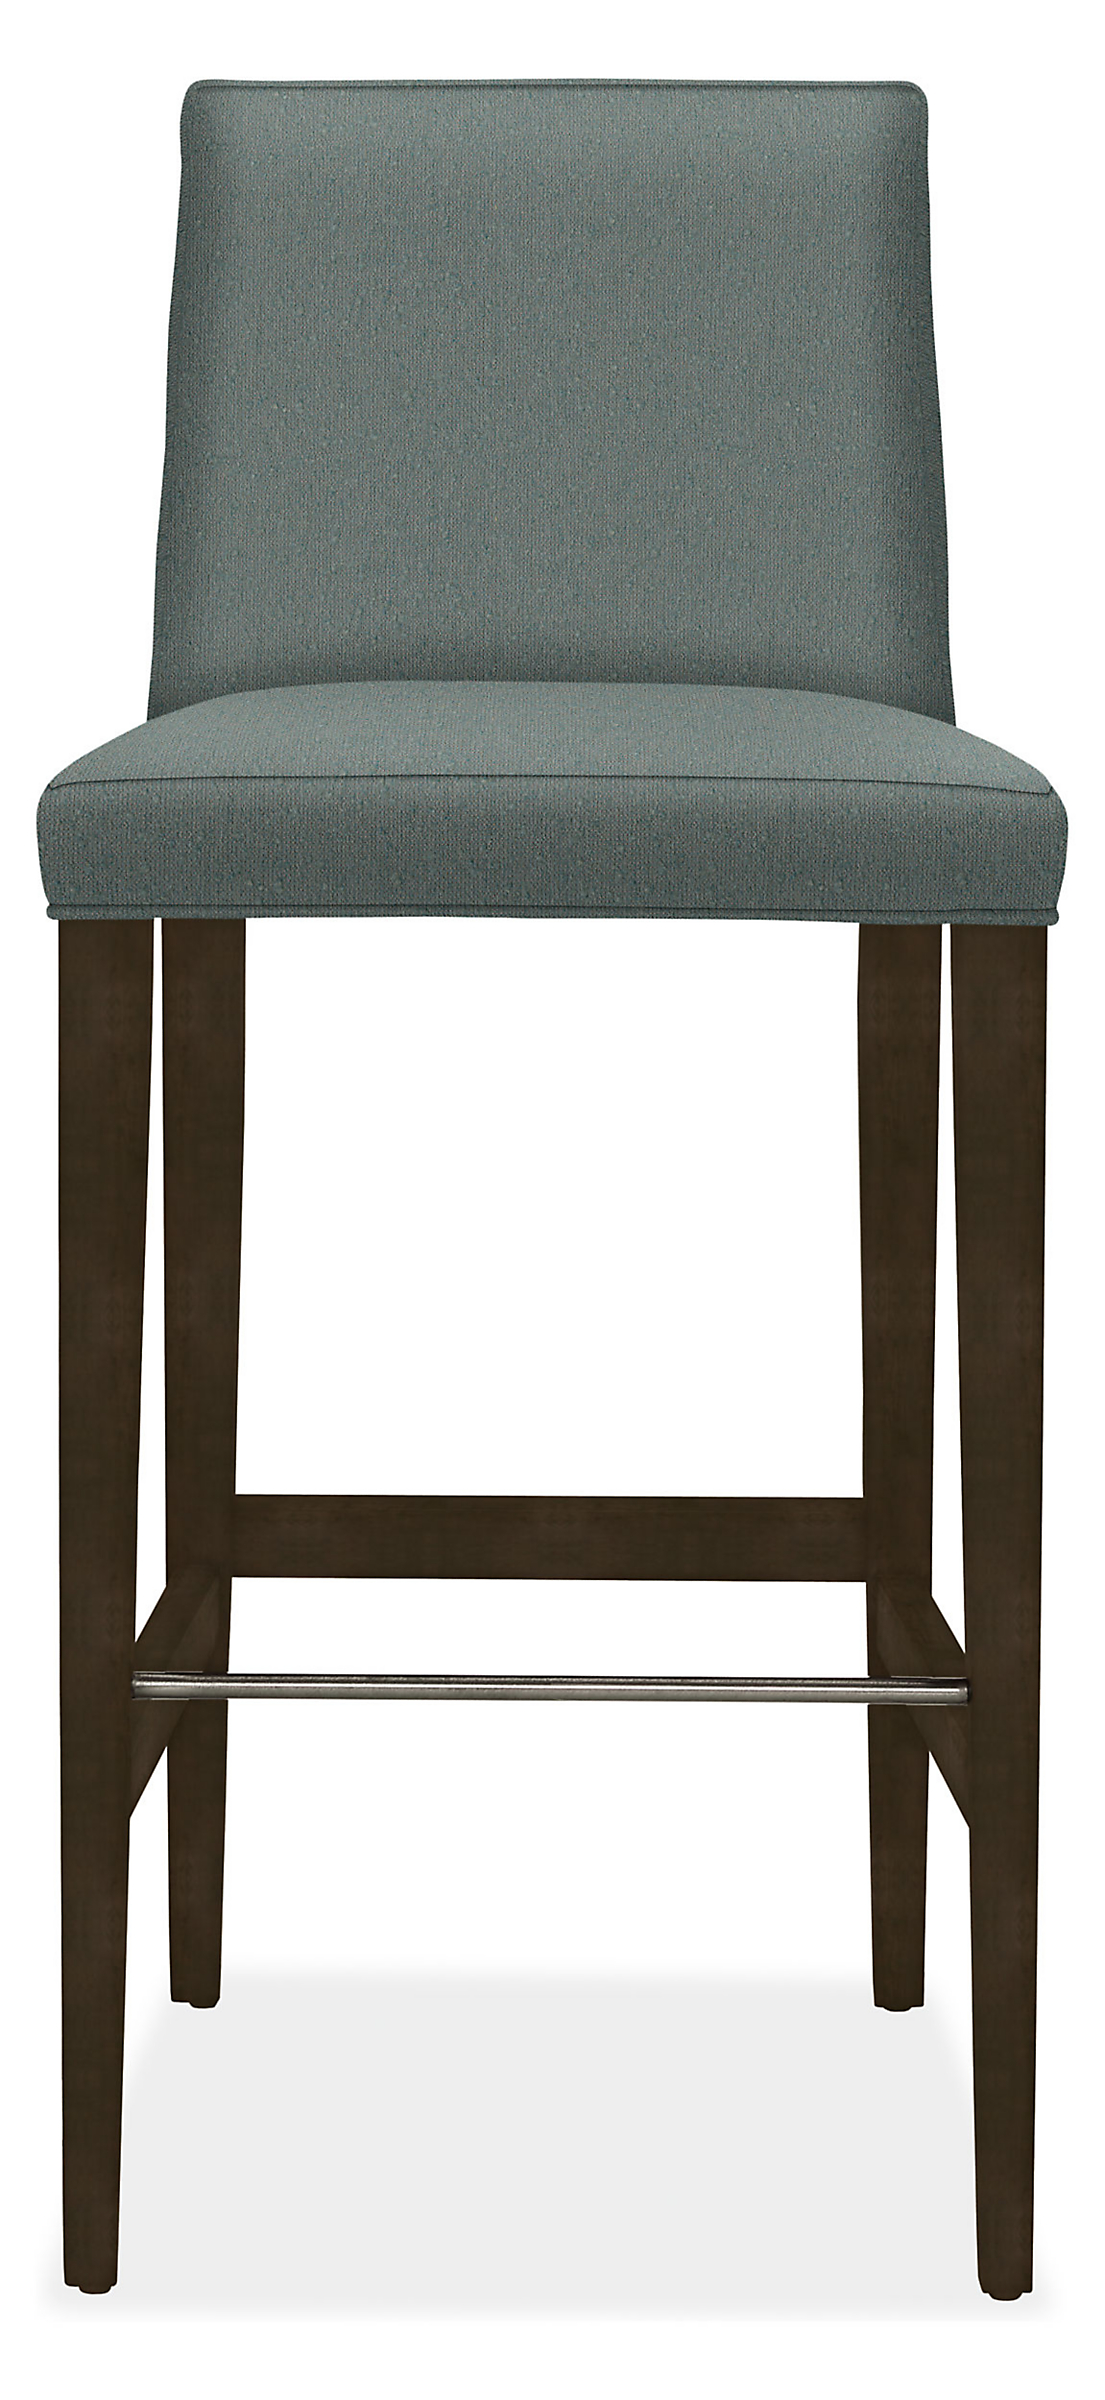 Front view of Ava Bar Stool in Declan Haze with Charcoal Legs.